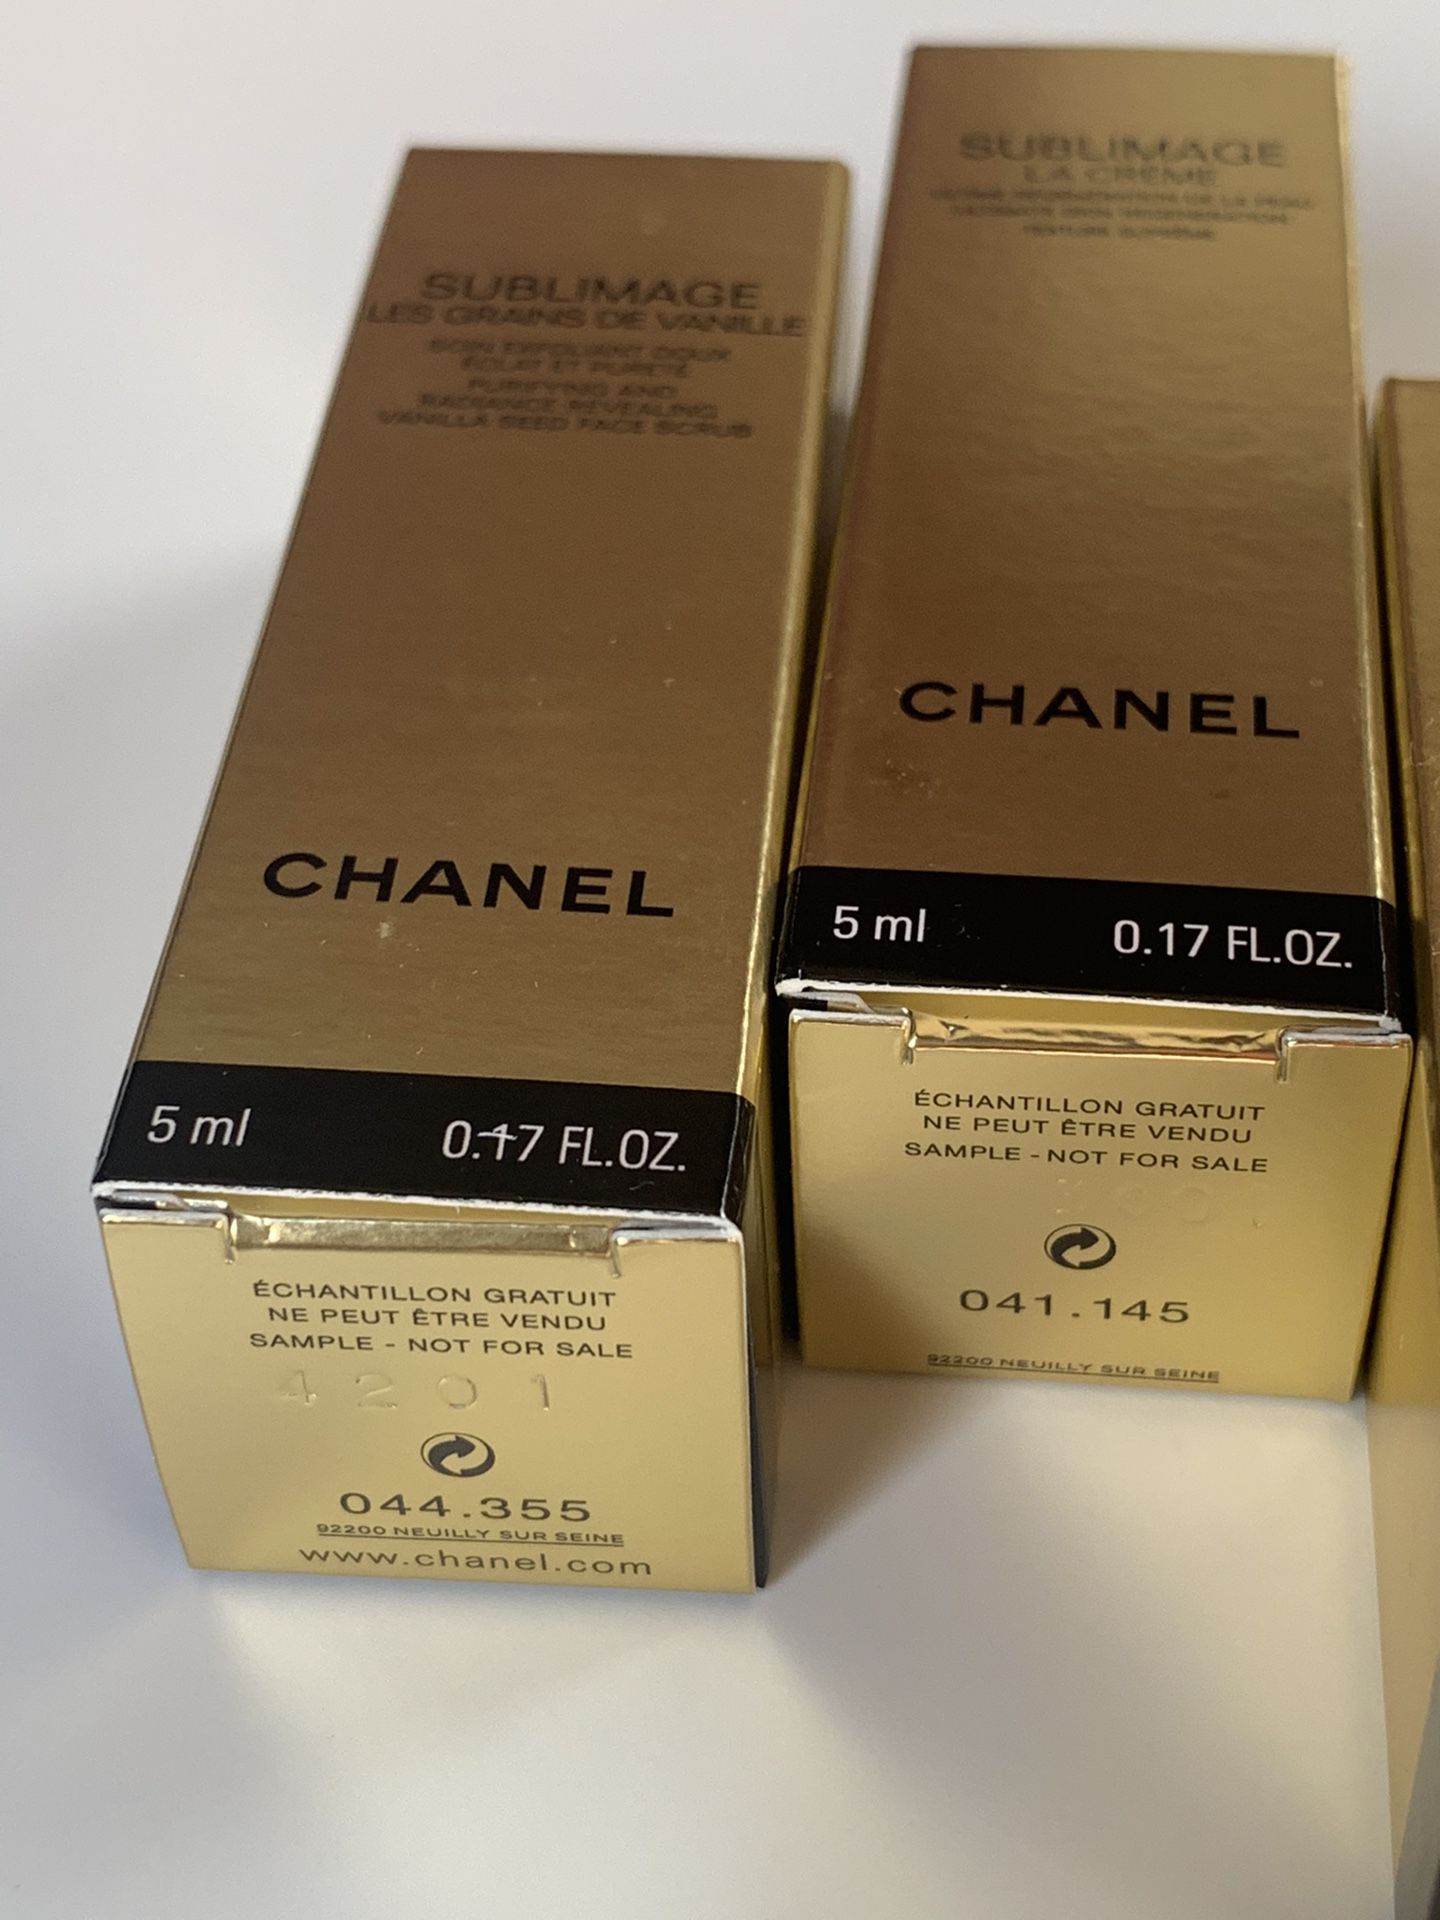 Chanel Sublimage Face & Eye Creme Bundle for Sale in Glenview, IL - OfferUp